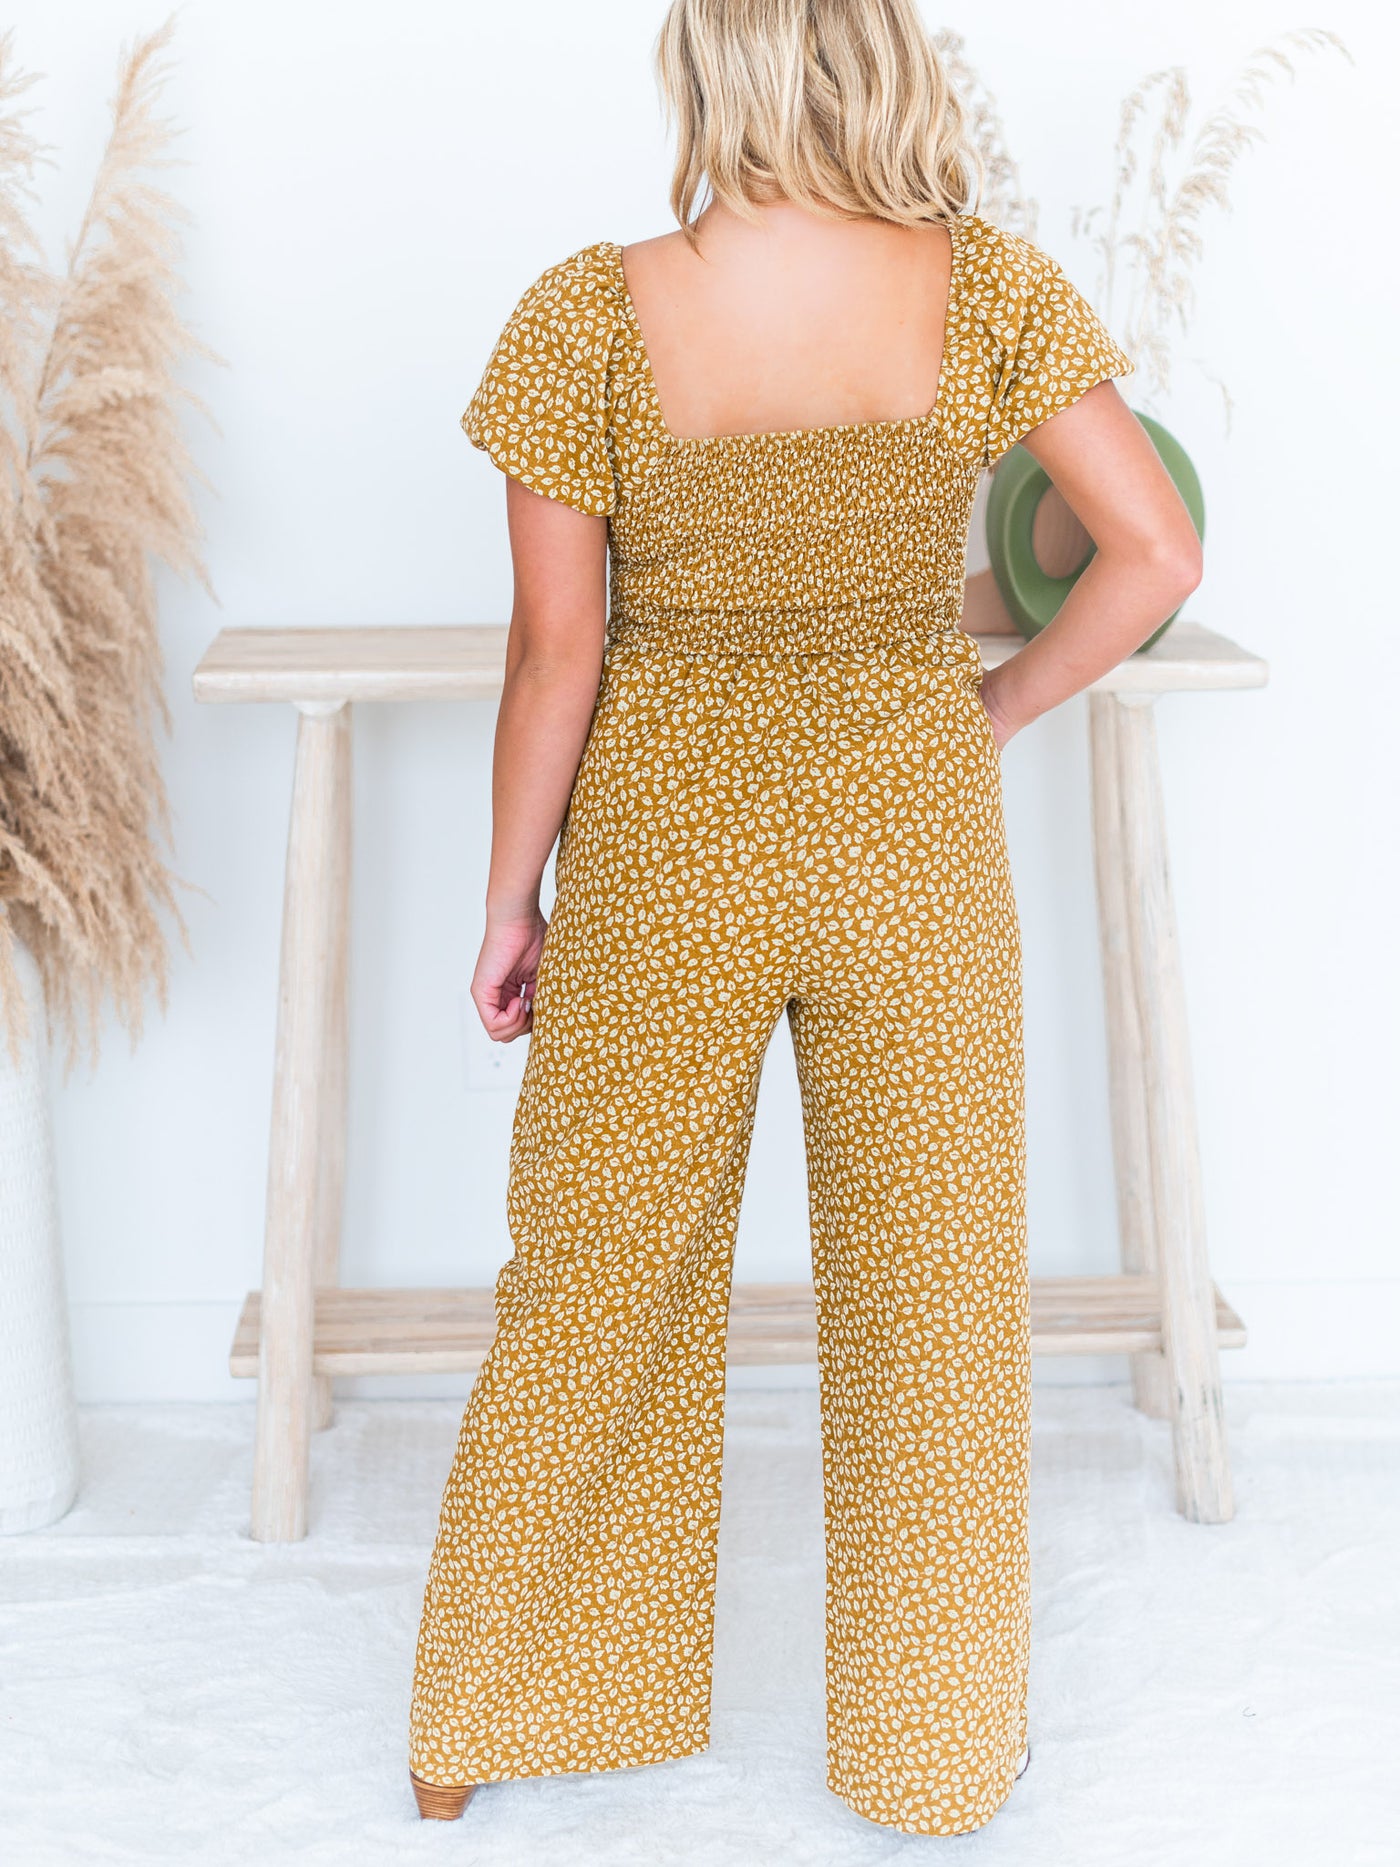 Queen of the South Jumpsuit